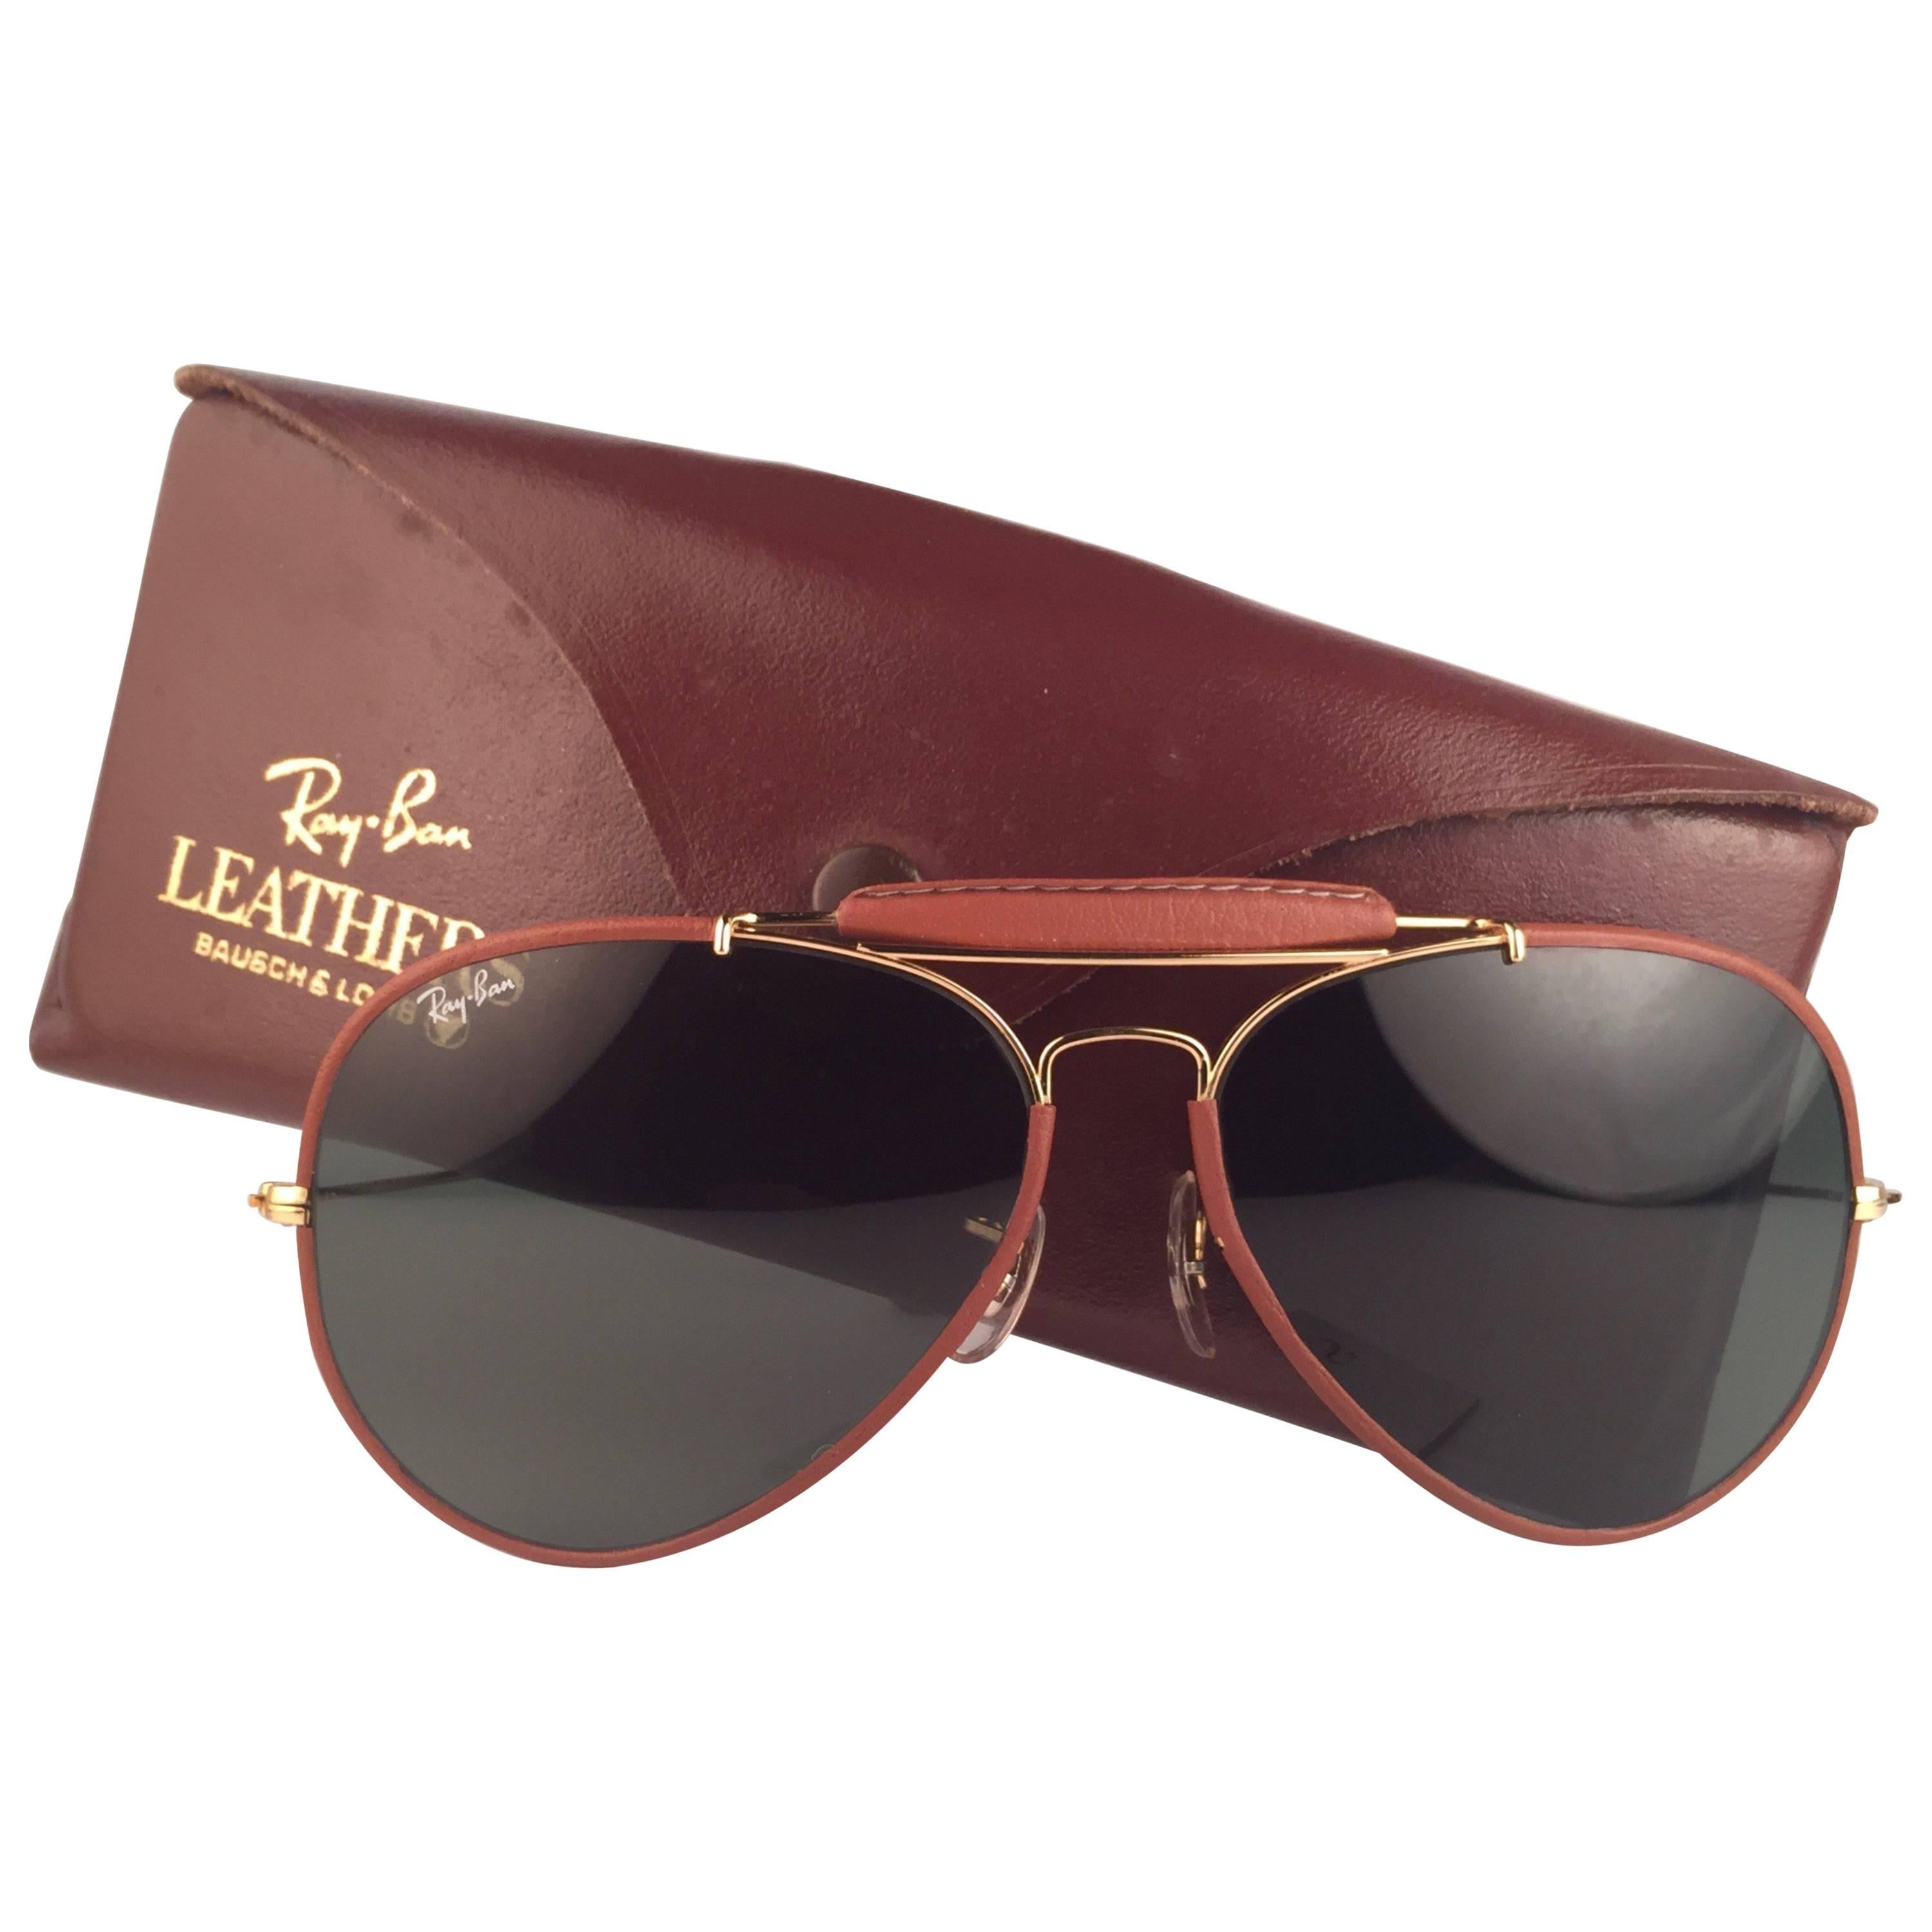 New Vintage Ray Ban Leathers 